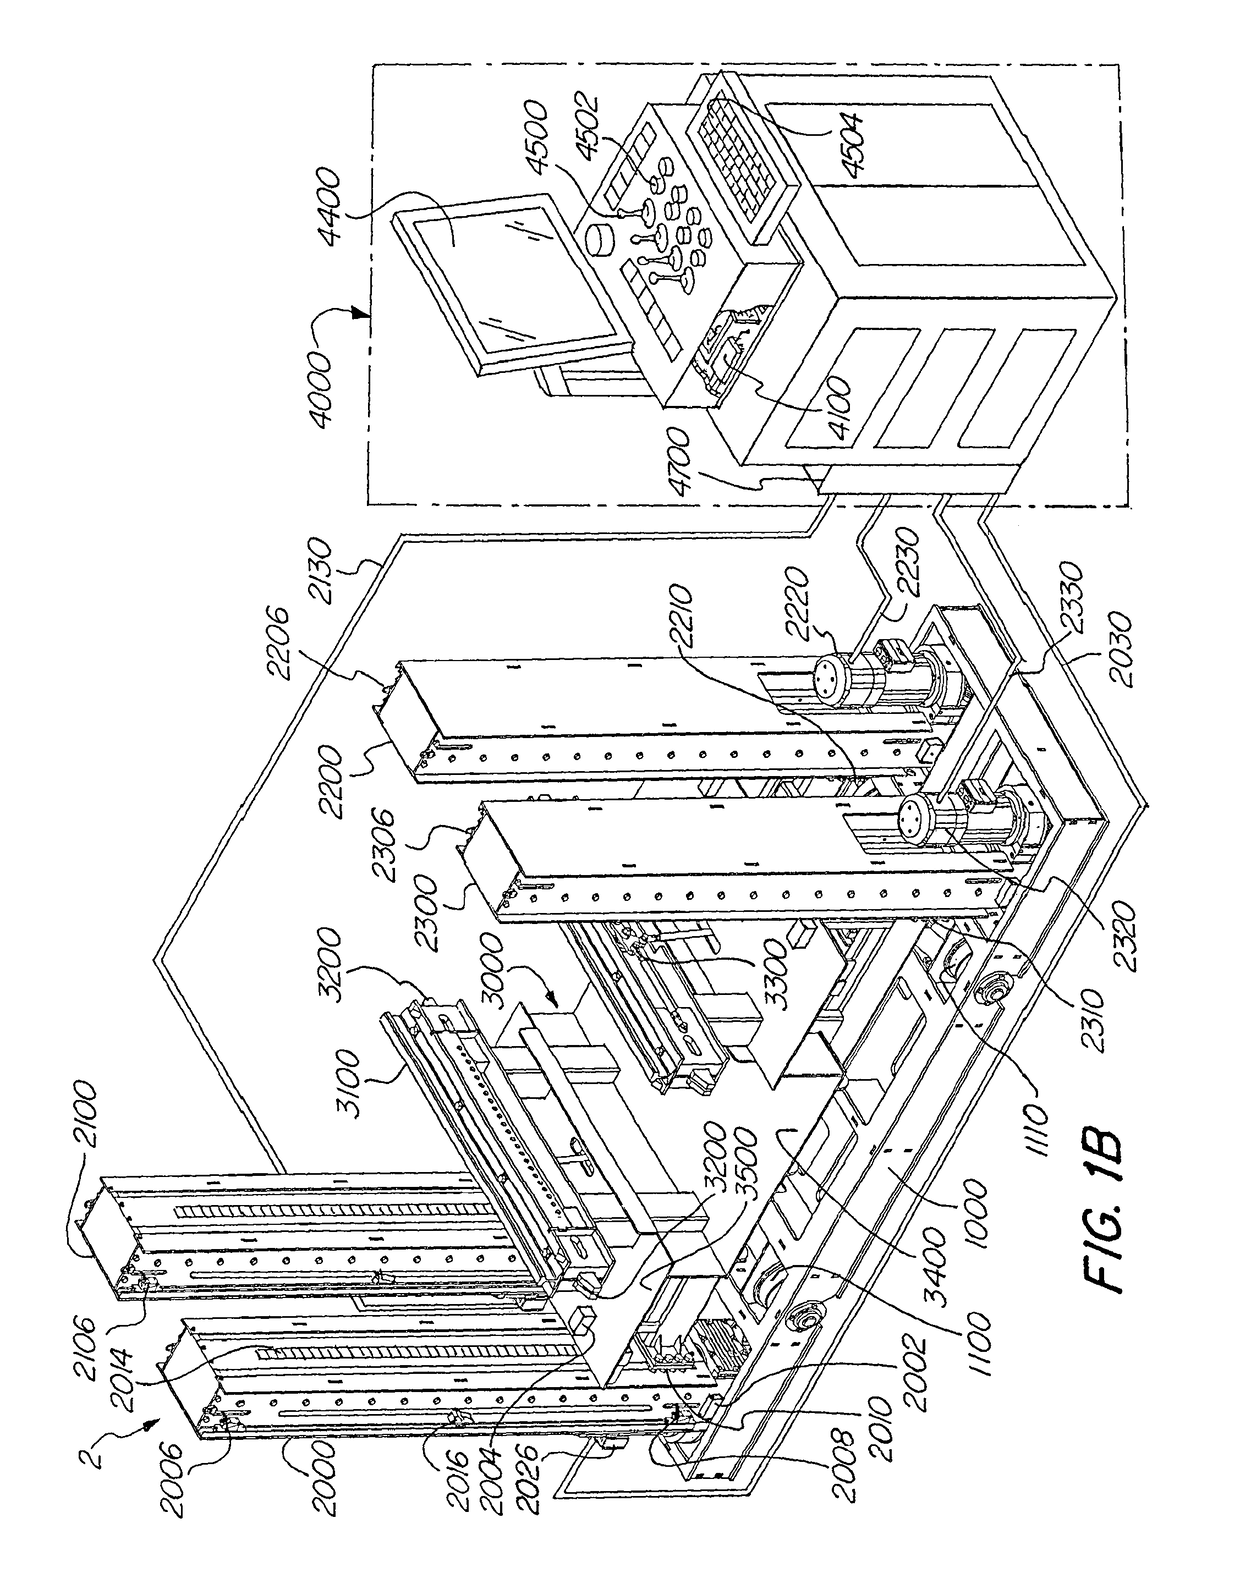 Independent drive motors for machinery positioning apparatus having independent lifting motors